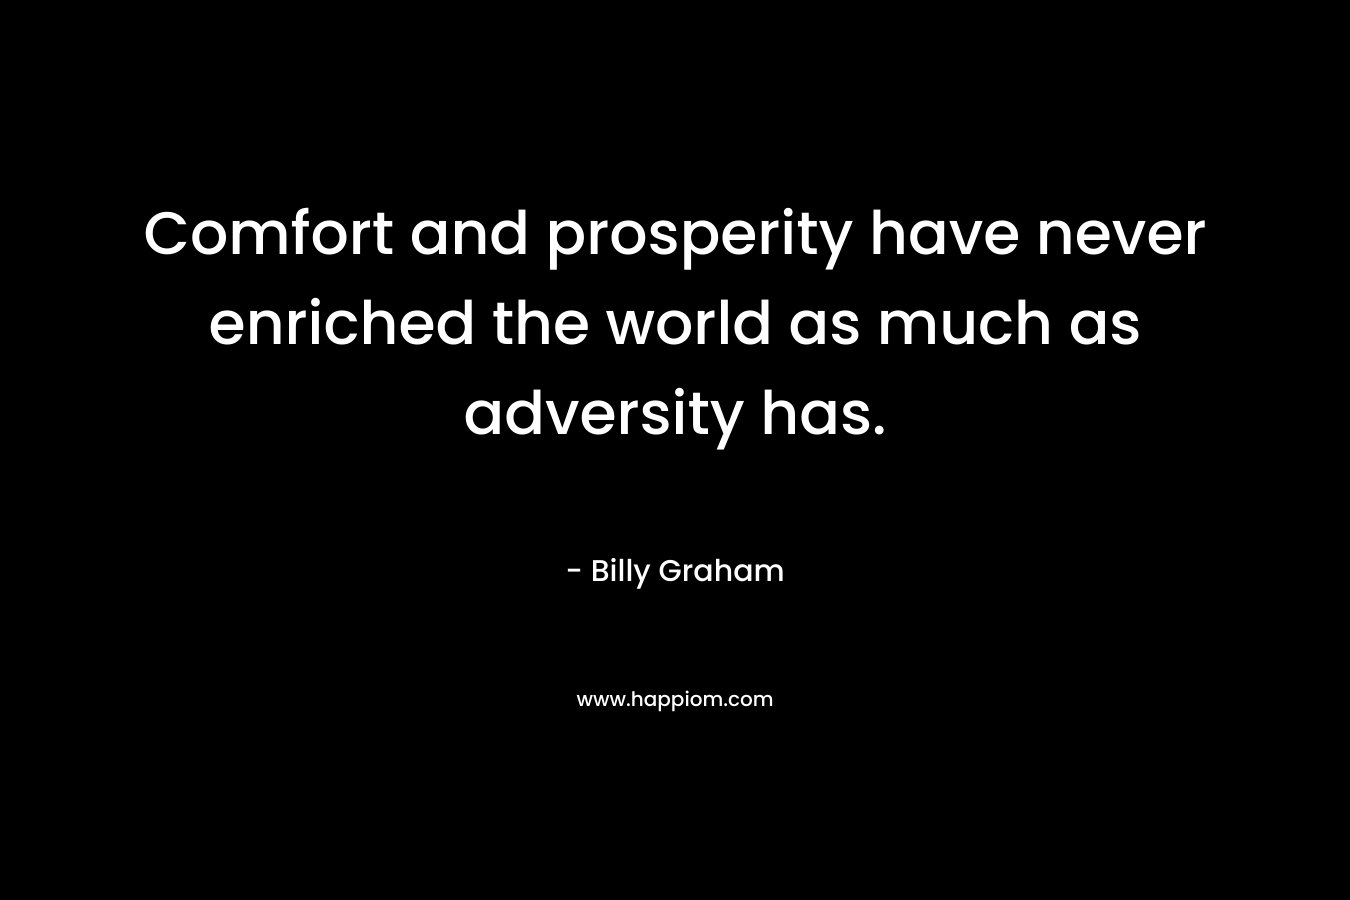 Comfort and prosperity have never enriched the world as much as adversity has. – Billy Graham